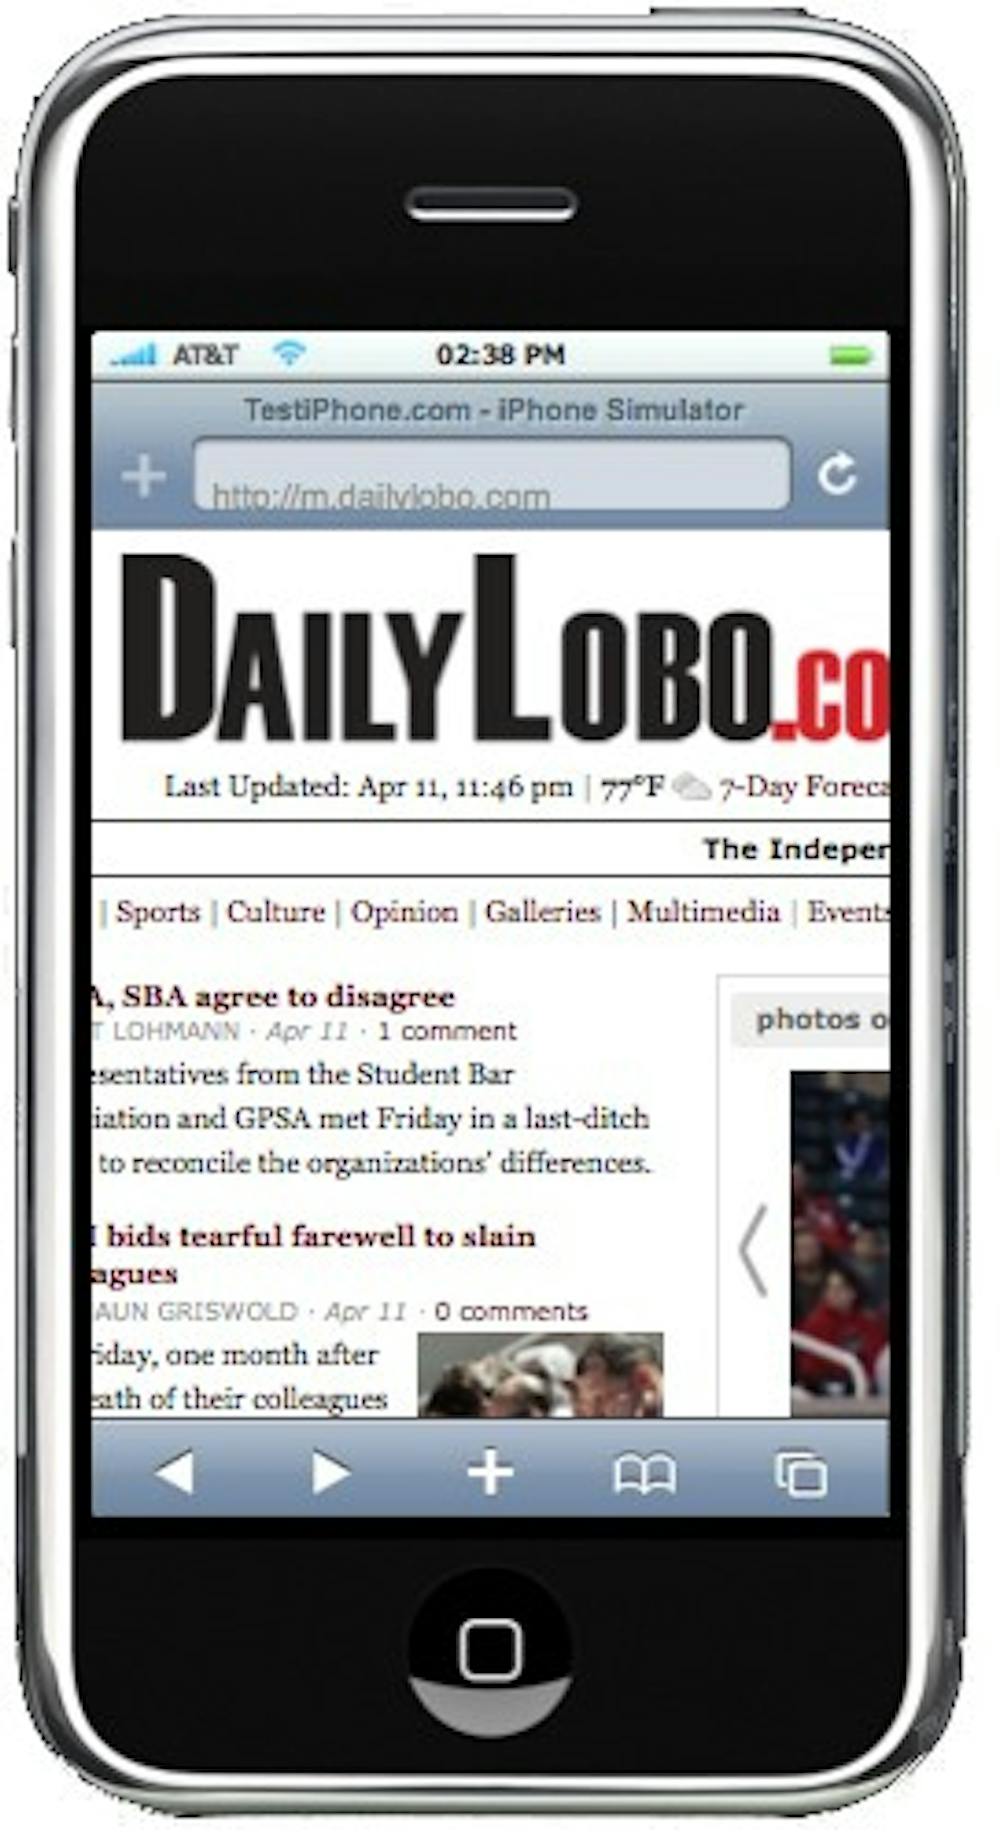 	Mobile Daily Lobo

	The Daily Lobo mobile edition is available on any internet capable device. Visit m.dailylobo.com on your phone to read the mobile version, no downloads required.

	Currently, you can access all of the articles from the standard web edition, including breaking news and archives going back to 2000. You can also view our online classifieds as well as get quick access to our Facebook page and Twitter feed.

	The Daily Lobo welcomes any suggestions or feedback.
Please send your email to onlineeditor@dailylobo.com

